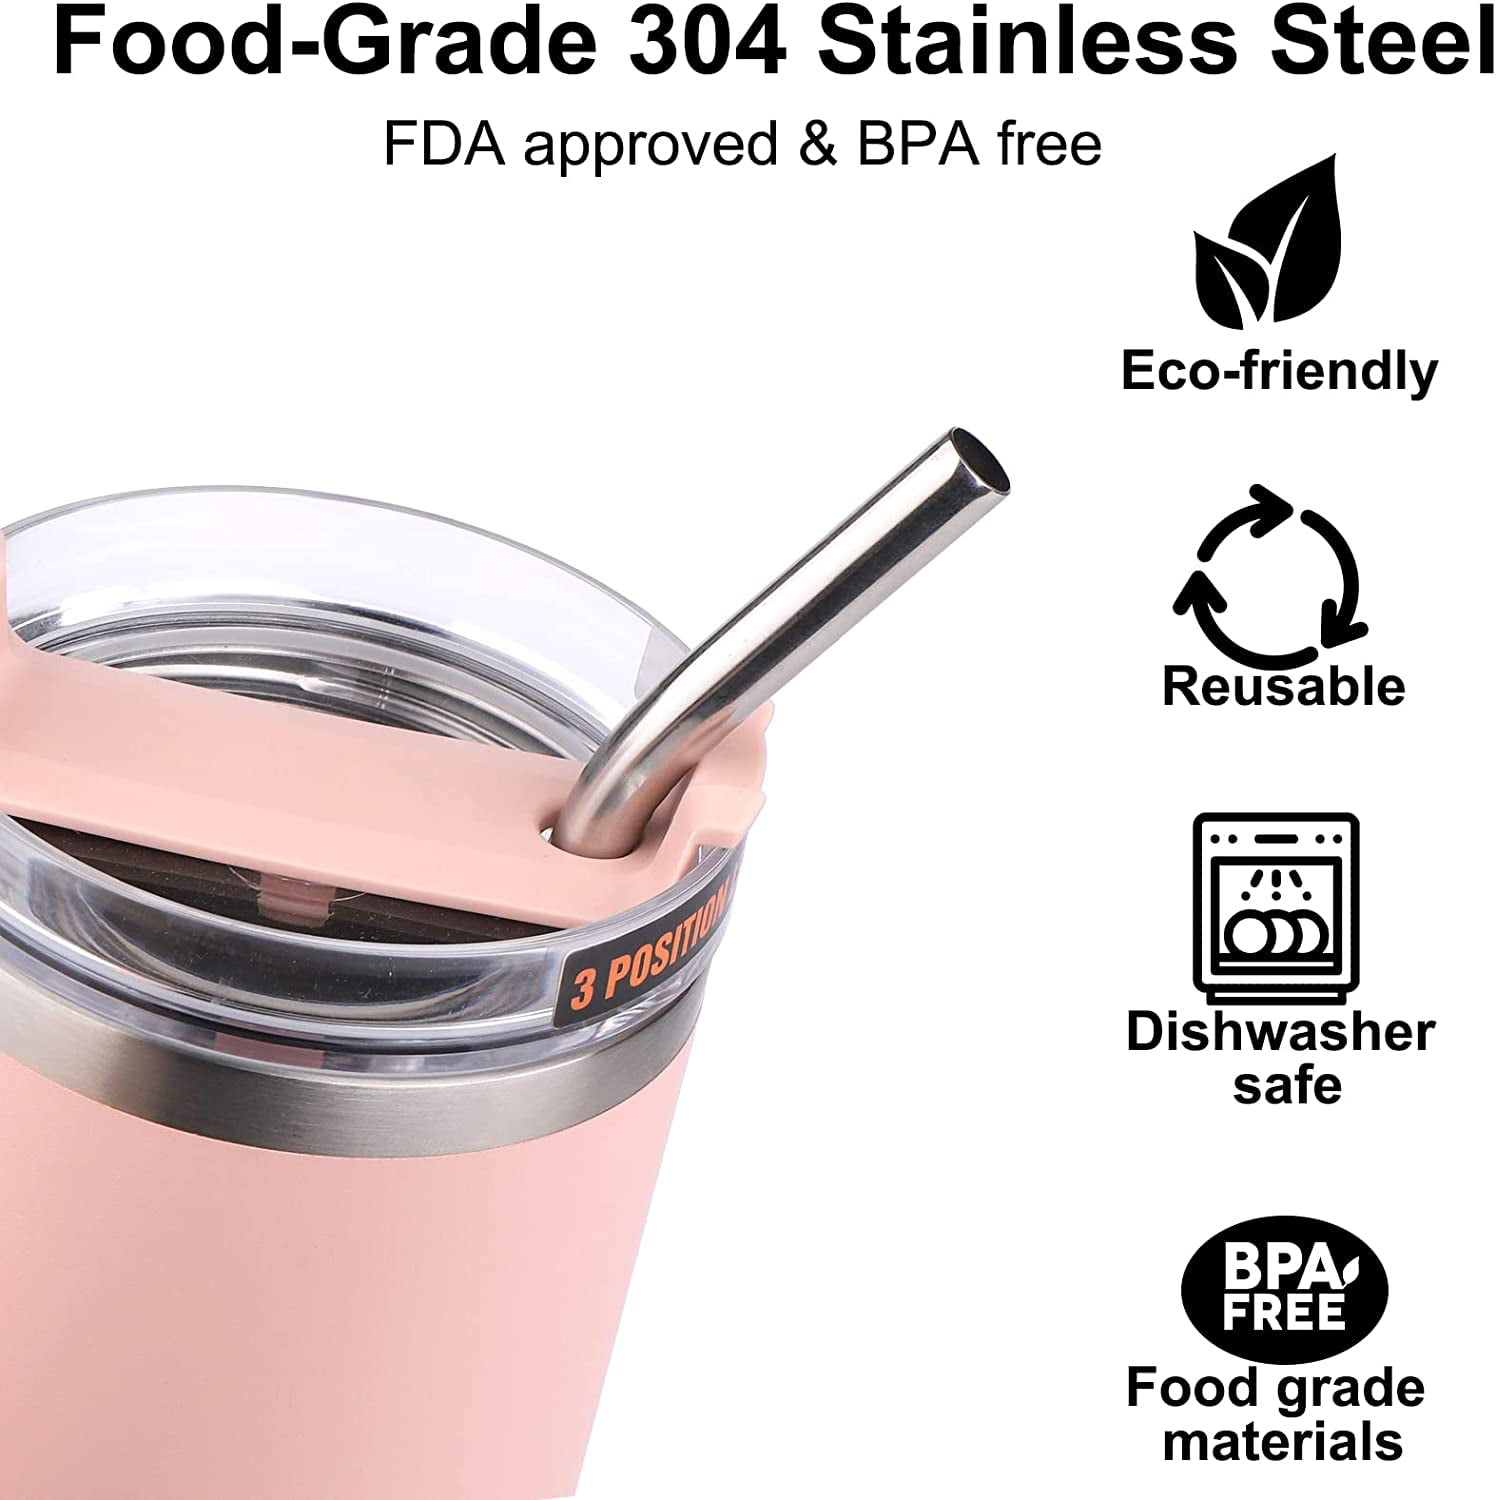 TRIANU 6 Pack Stainless Steel Straw Replacement 40 oz for Stanley Adventure  Travel Tumbler, Reusable Straws with Cleaning Brush & Bag Compatible with  Stanley 40oz Stanley Cup Tumbler 